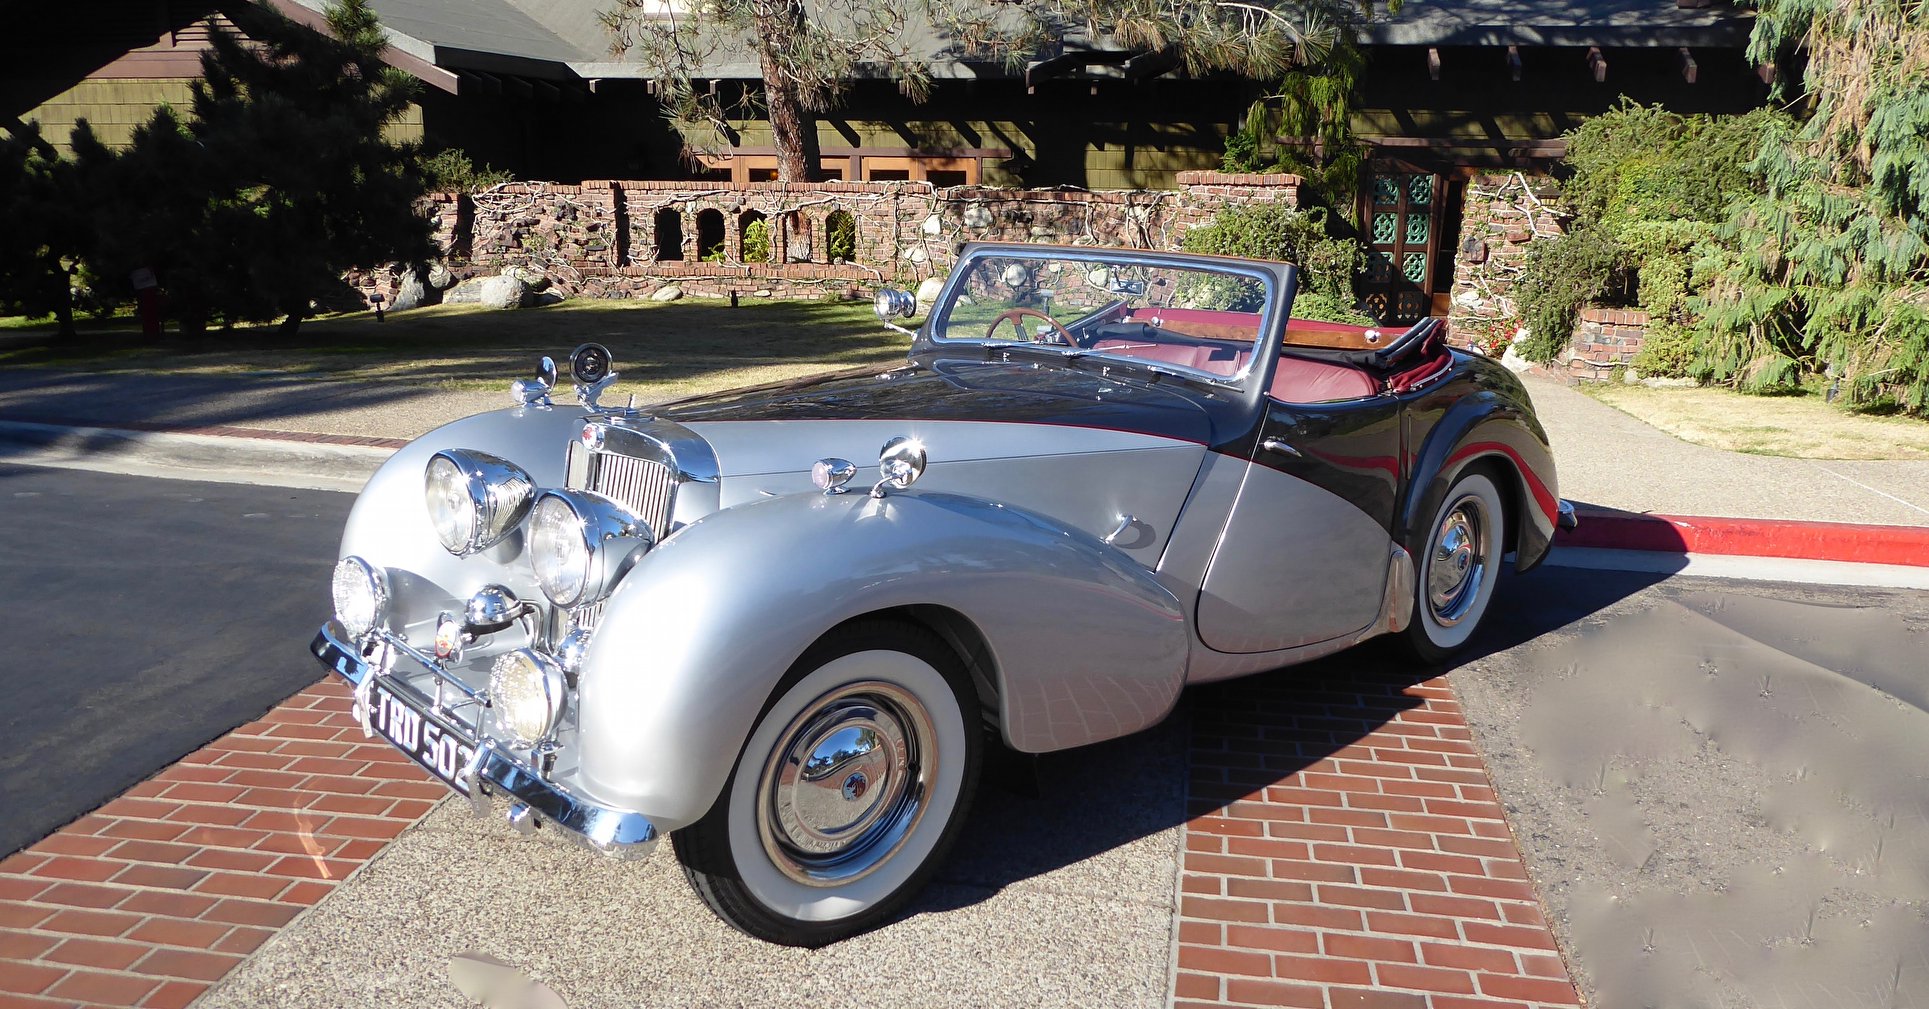 This 1947 Triumph 1800 Is Meticulously Restored and Regularly Enjoyed